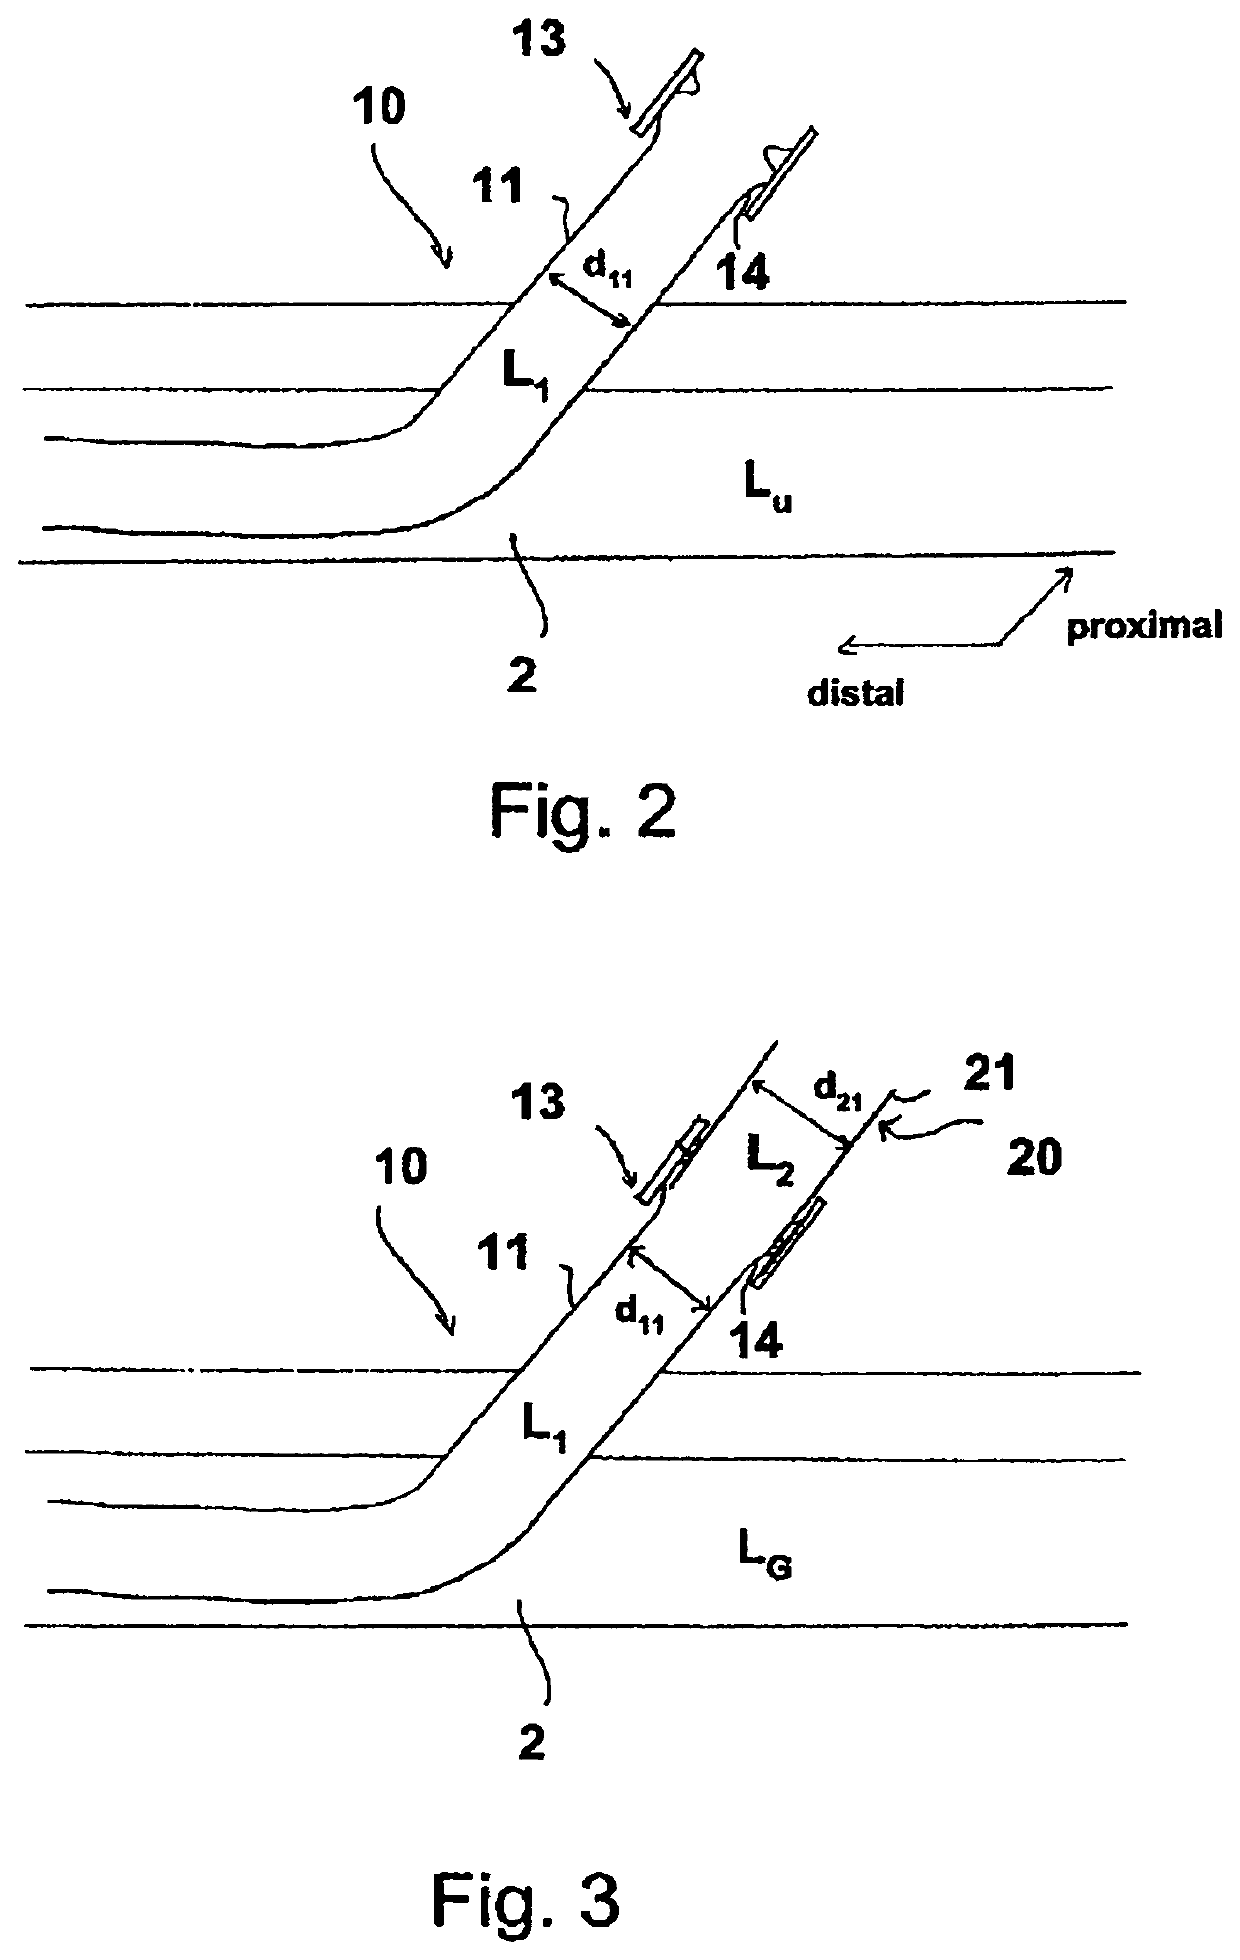 Sheath device for inserting a catheter